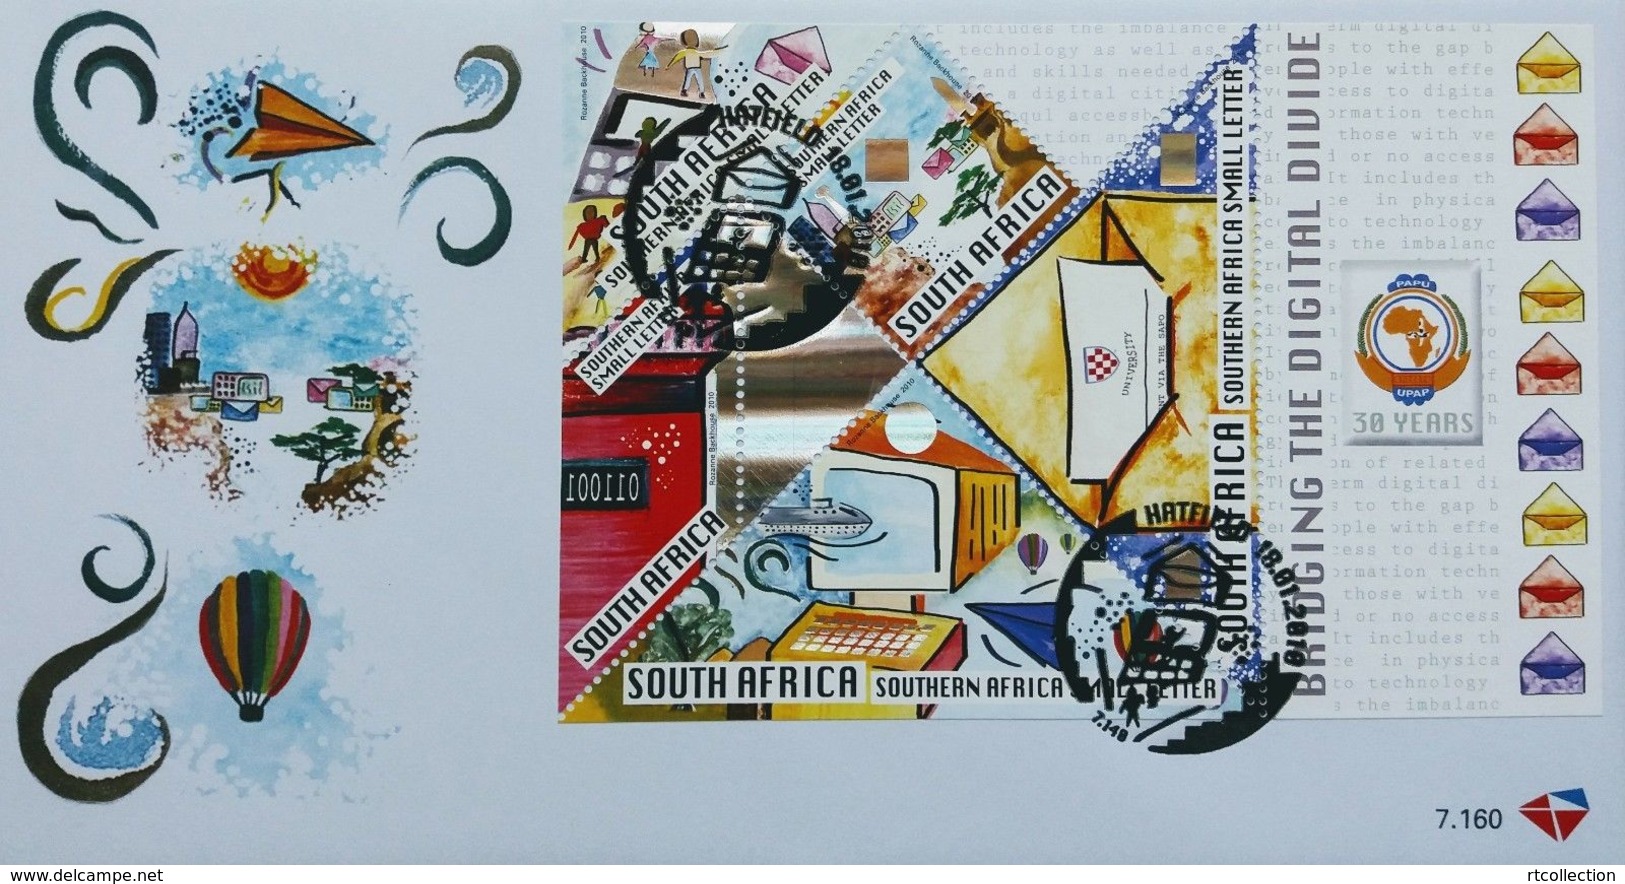 South Africa 2010 First Day Cover FDC Bridging The Digital Divide Letter Computers Sciences Post 18/1/2010 Stamps SG1743 - Correo Postal